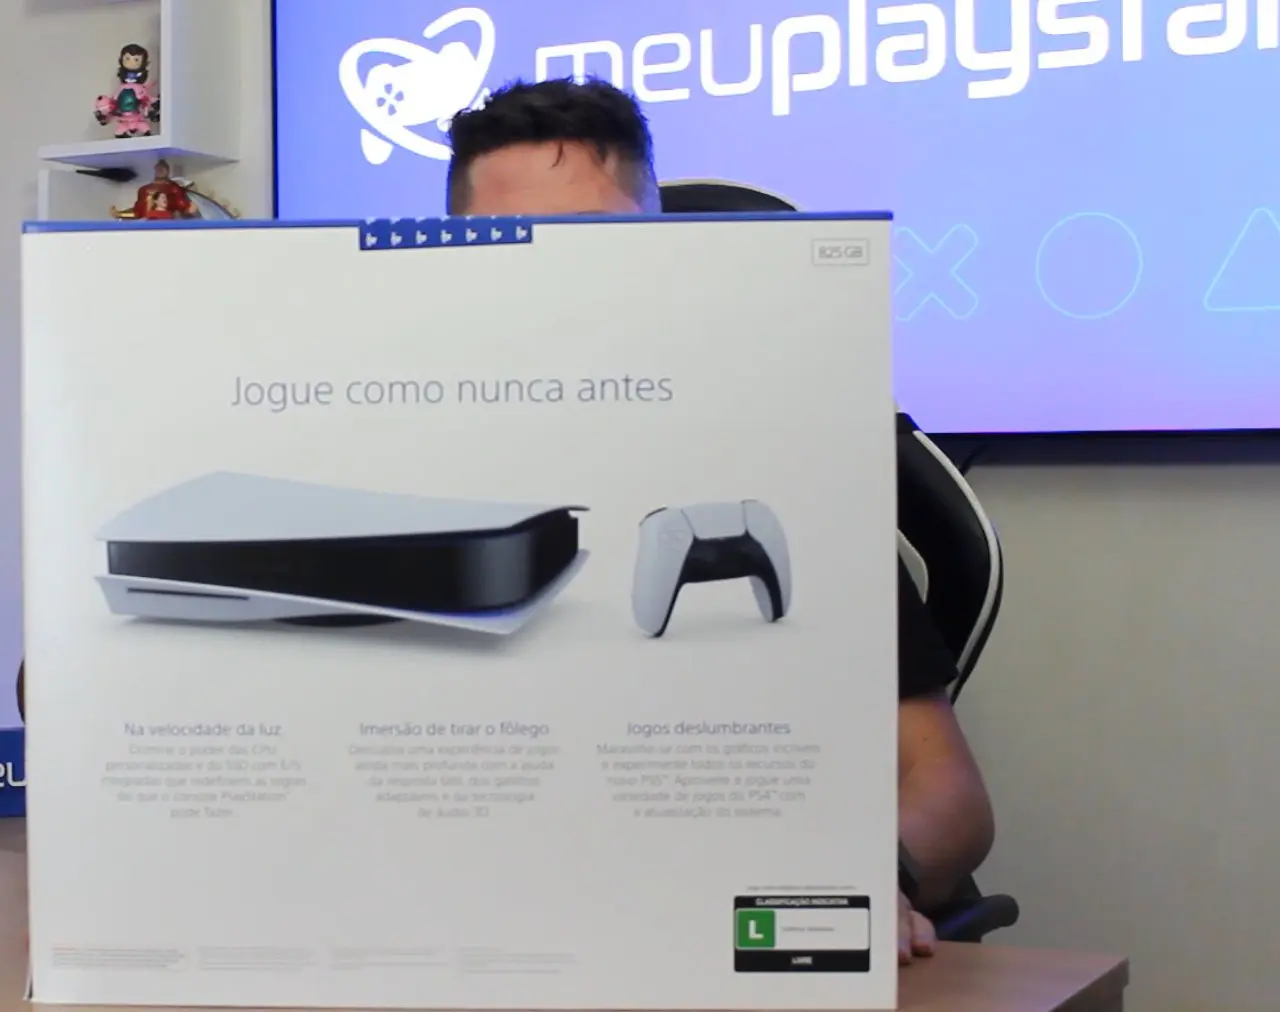 Unboxing do PlayStation 5